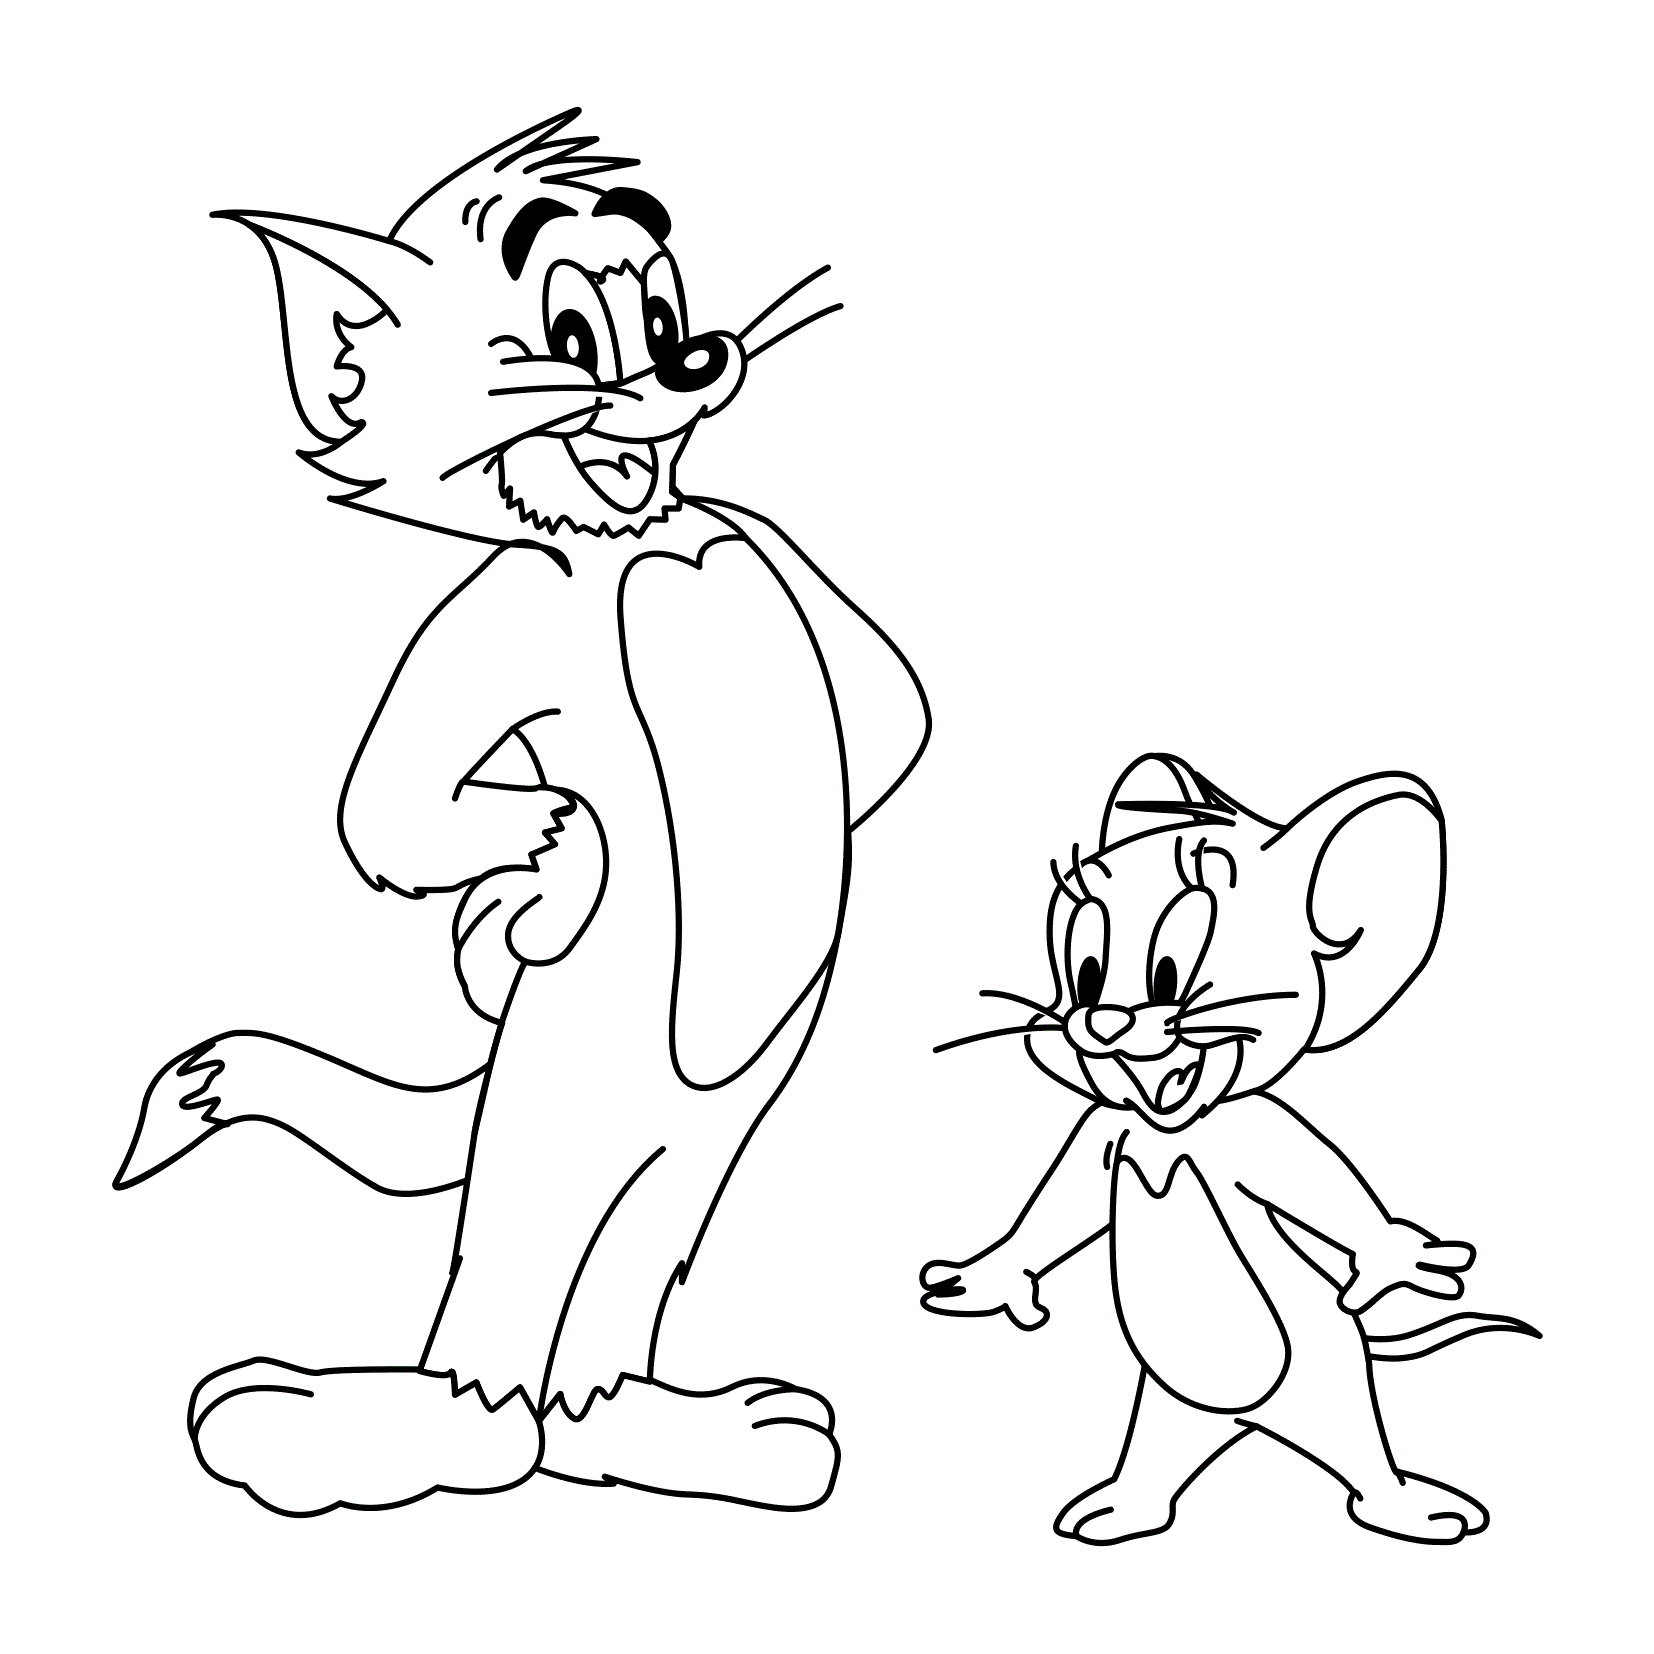 Coloring Page Tom And Jerry - Free Printable Templates